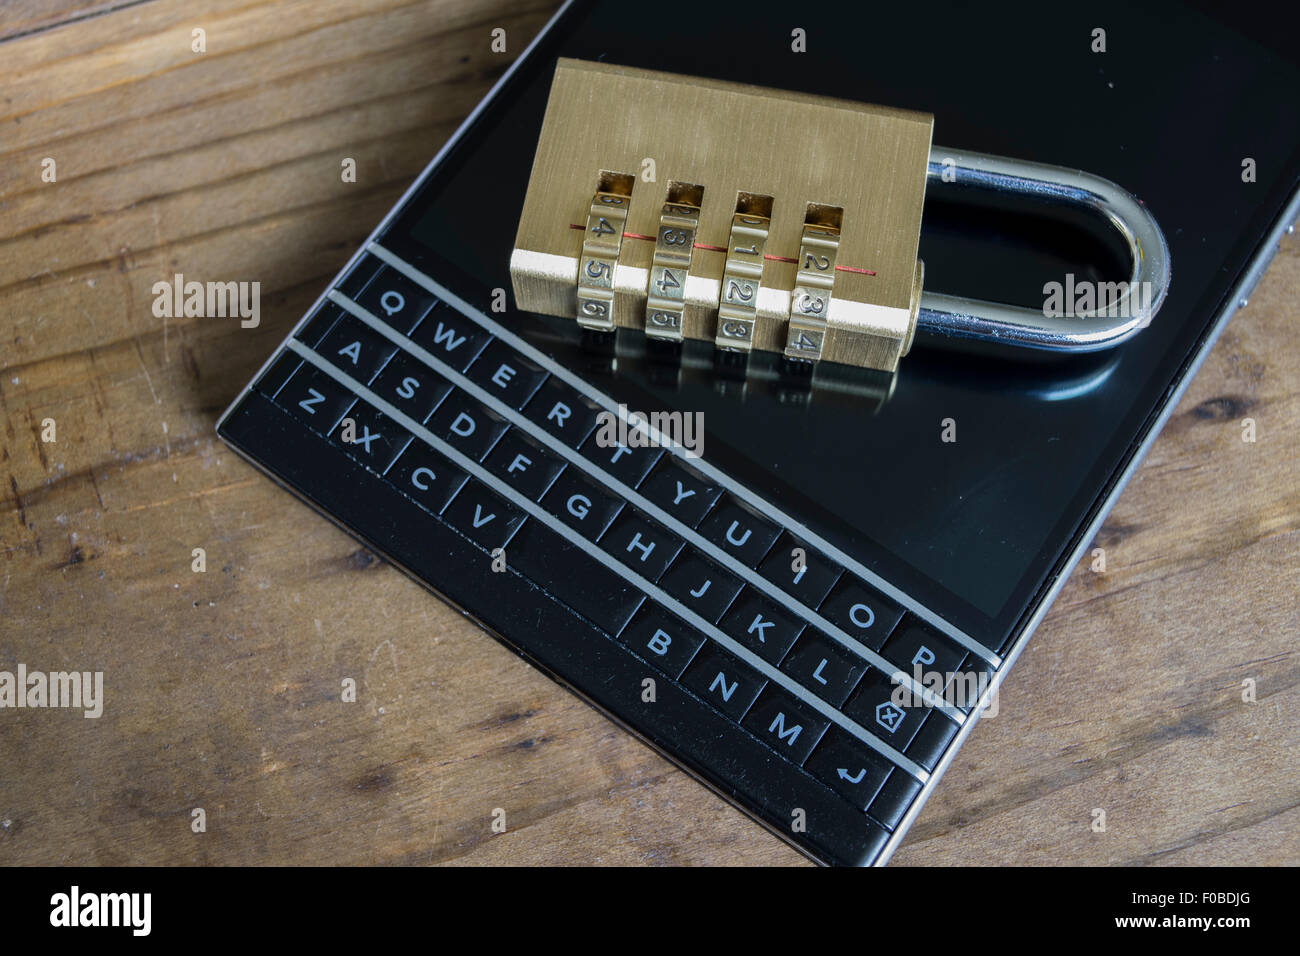 Mobile Device Security Stock Photo